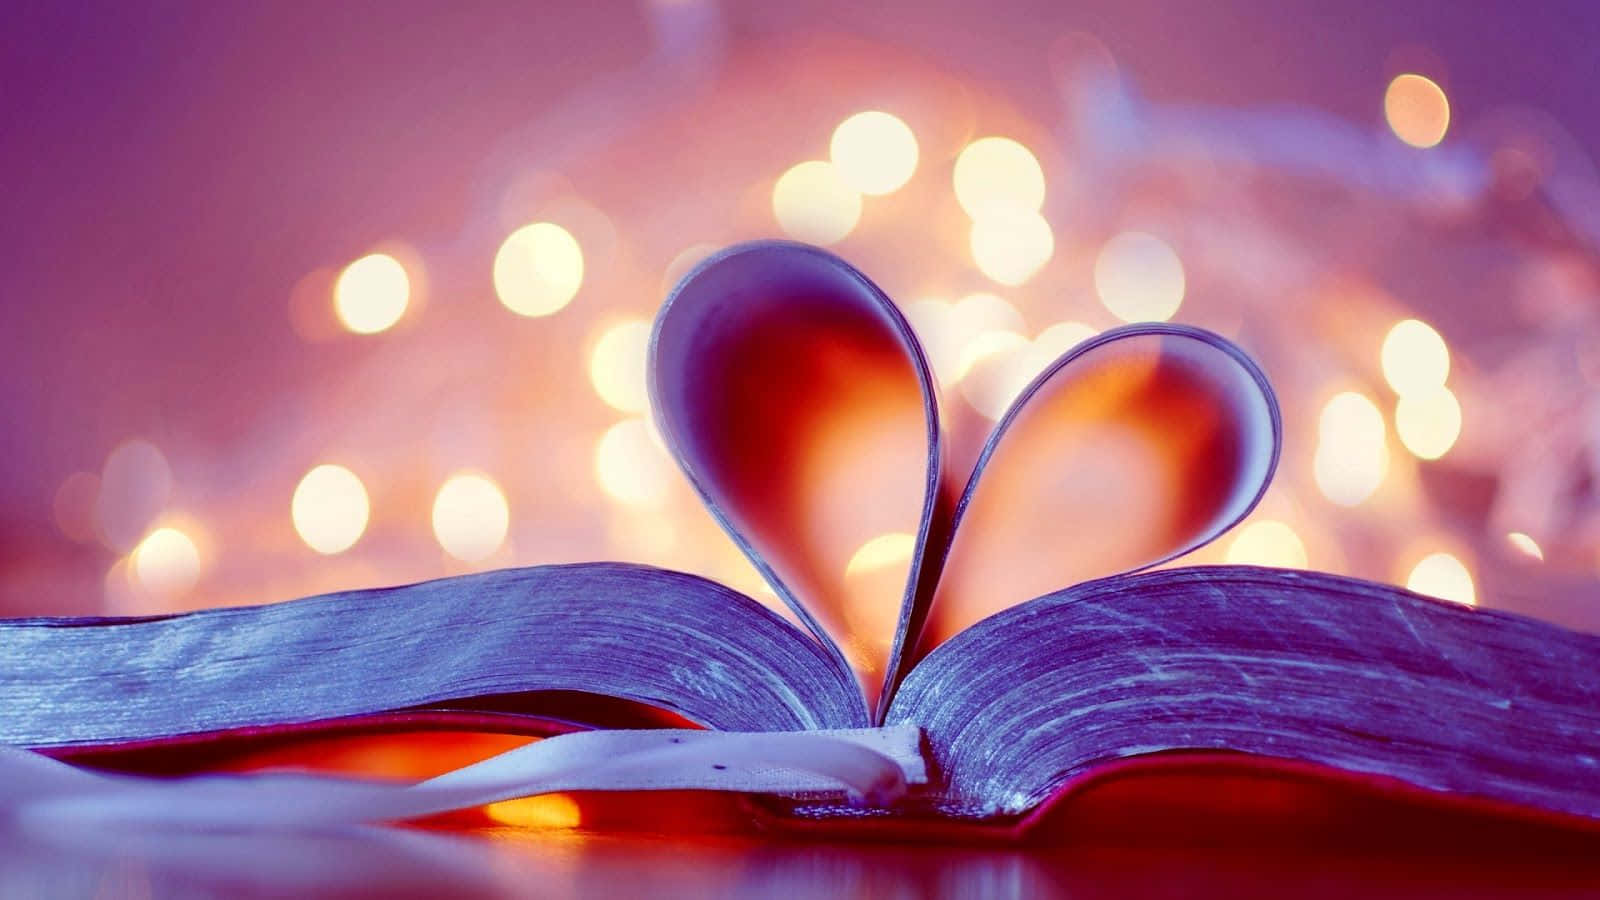 Cute Valentines Book Heart Photograph Background